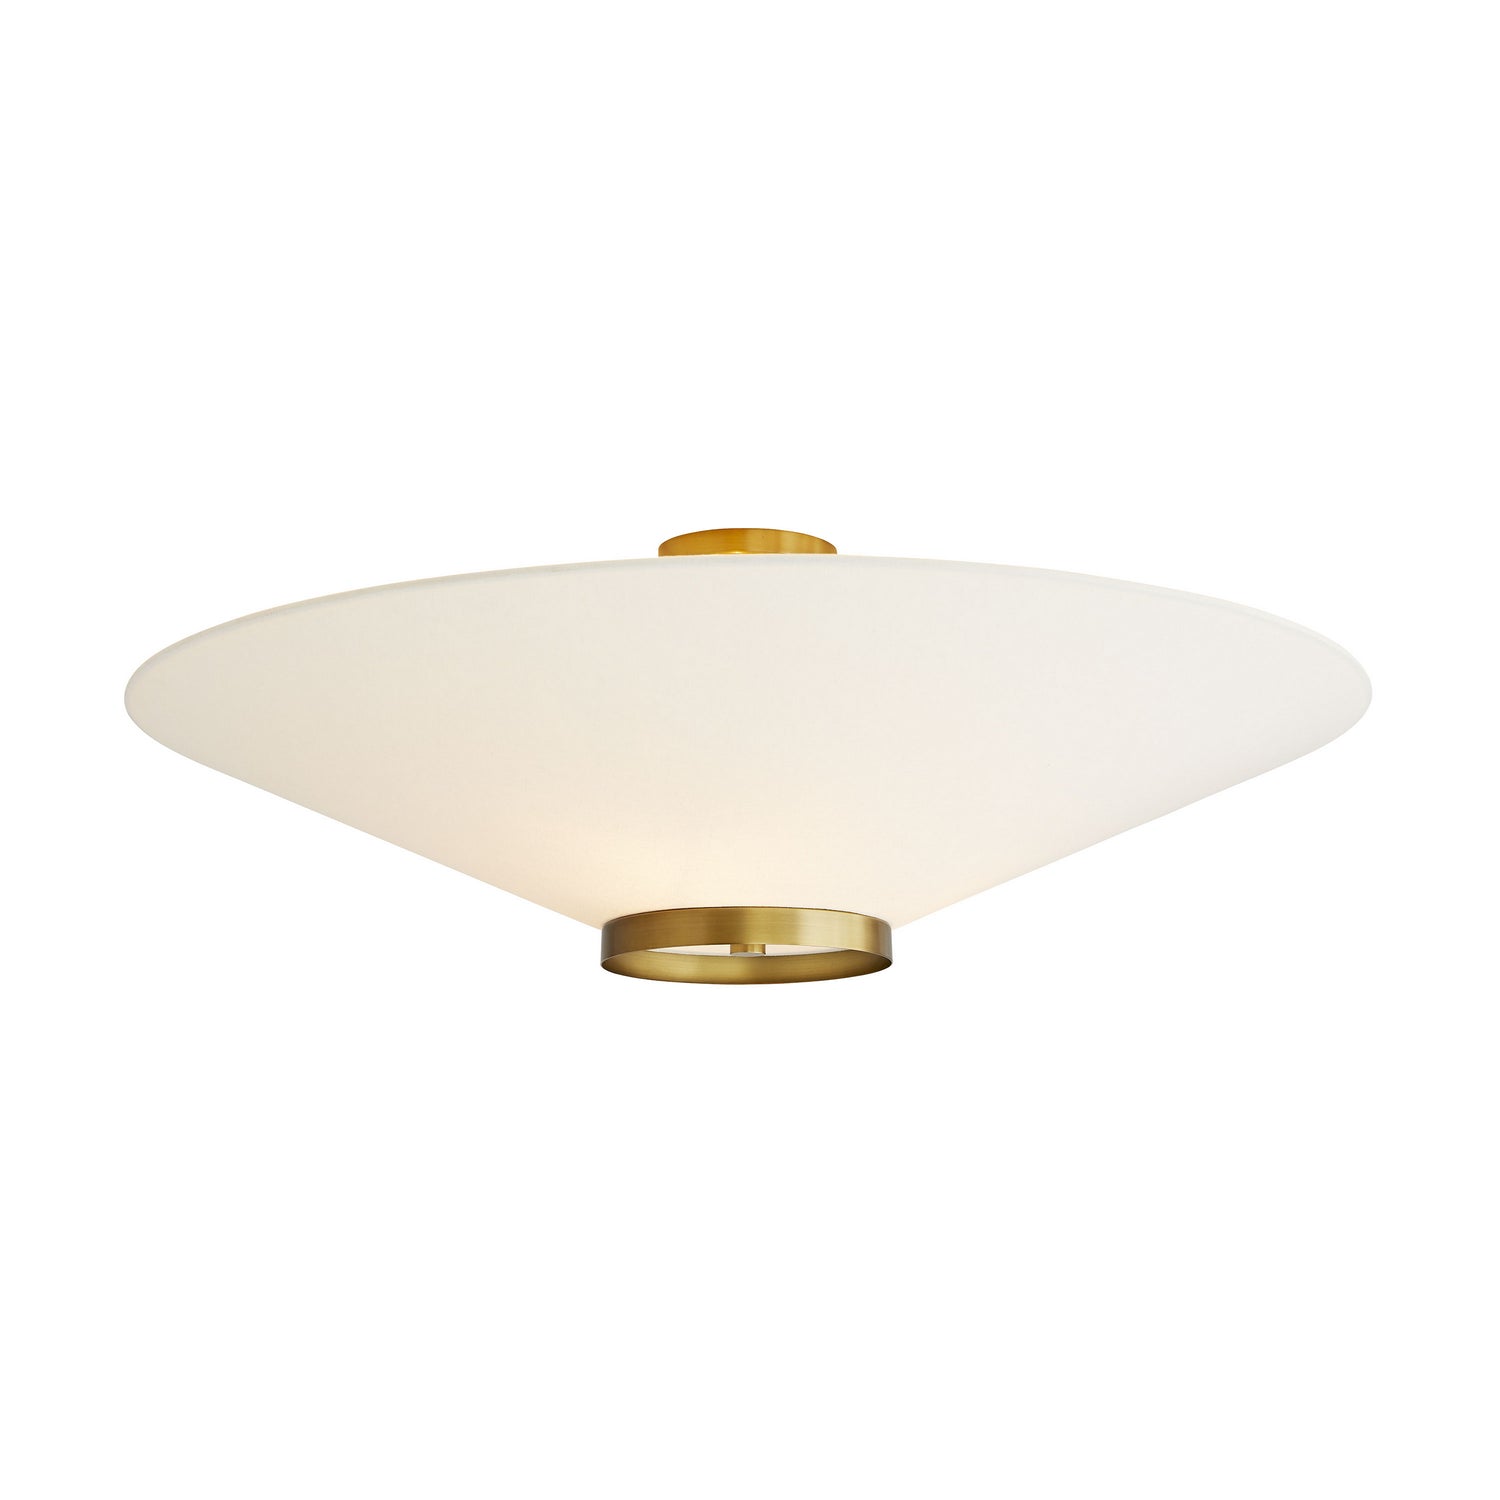 Three Light Flush Mount from the Decker collection in Antique Brass finish